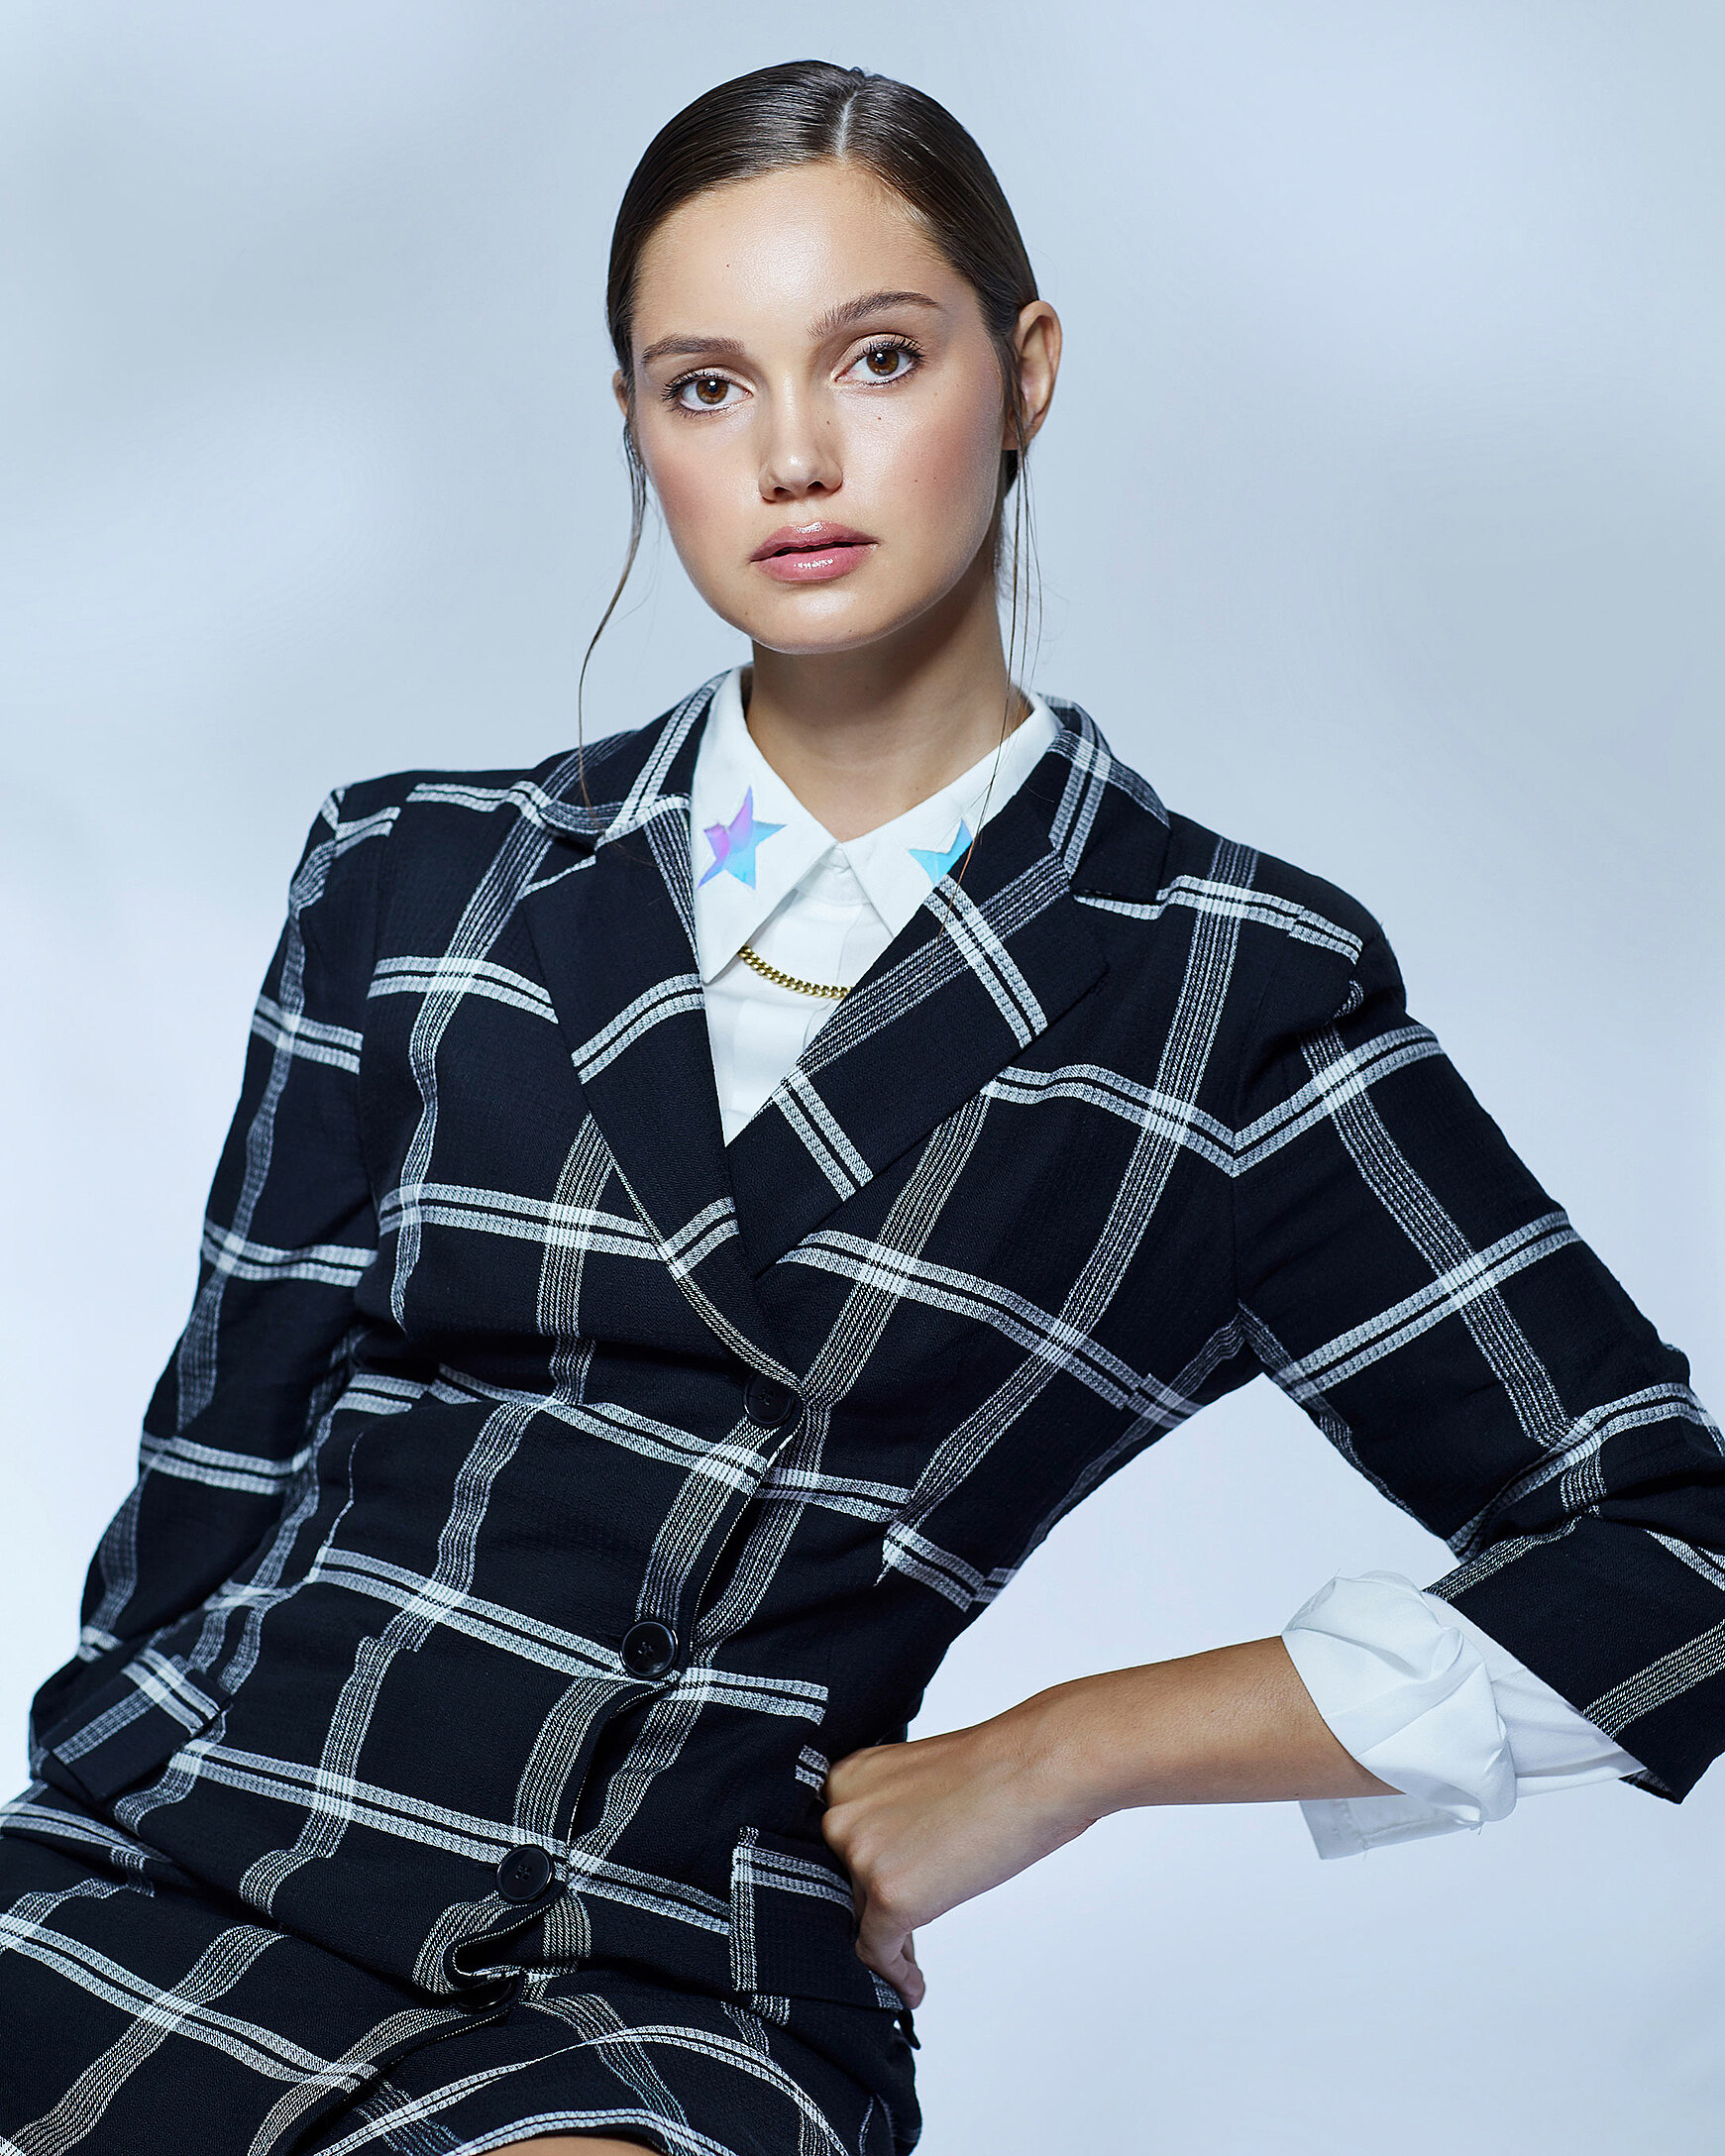 A female model who wears a checked blazer with a white blouse with blue stars on the chocker and sleek brown hair. She looks direct with a strong view into the camera.